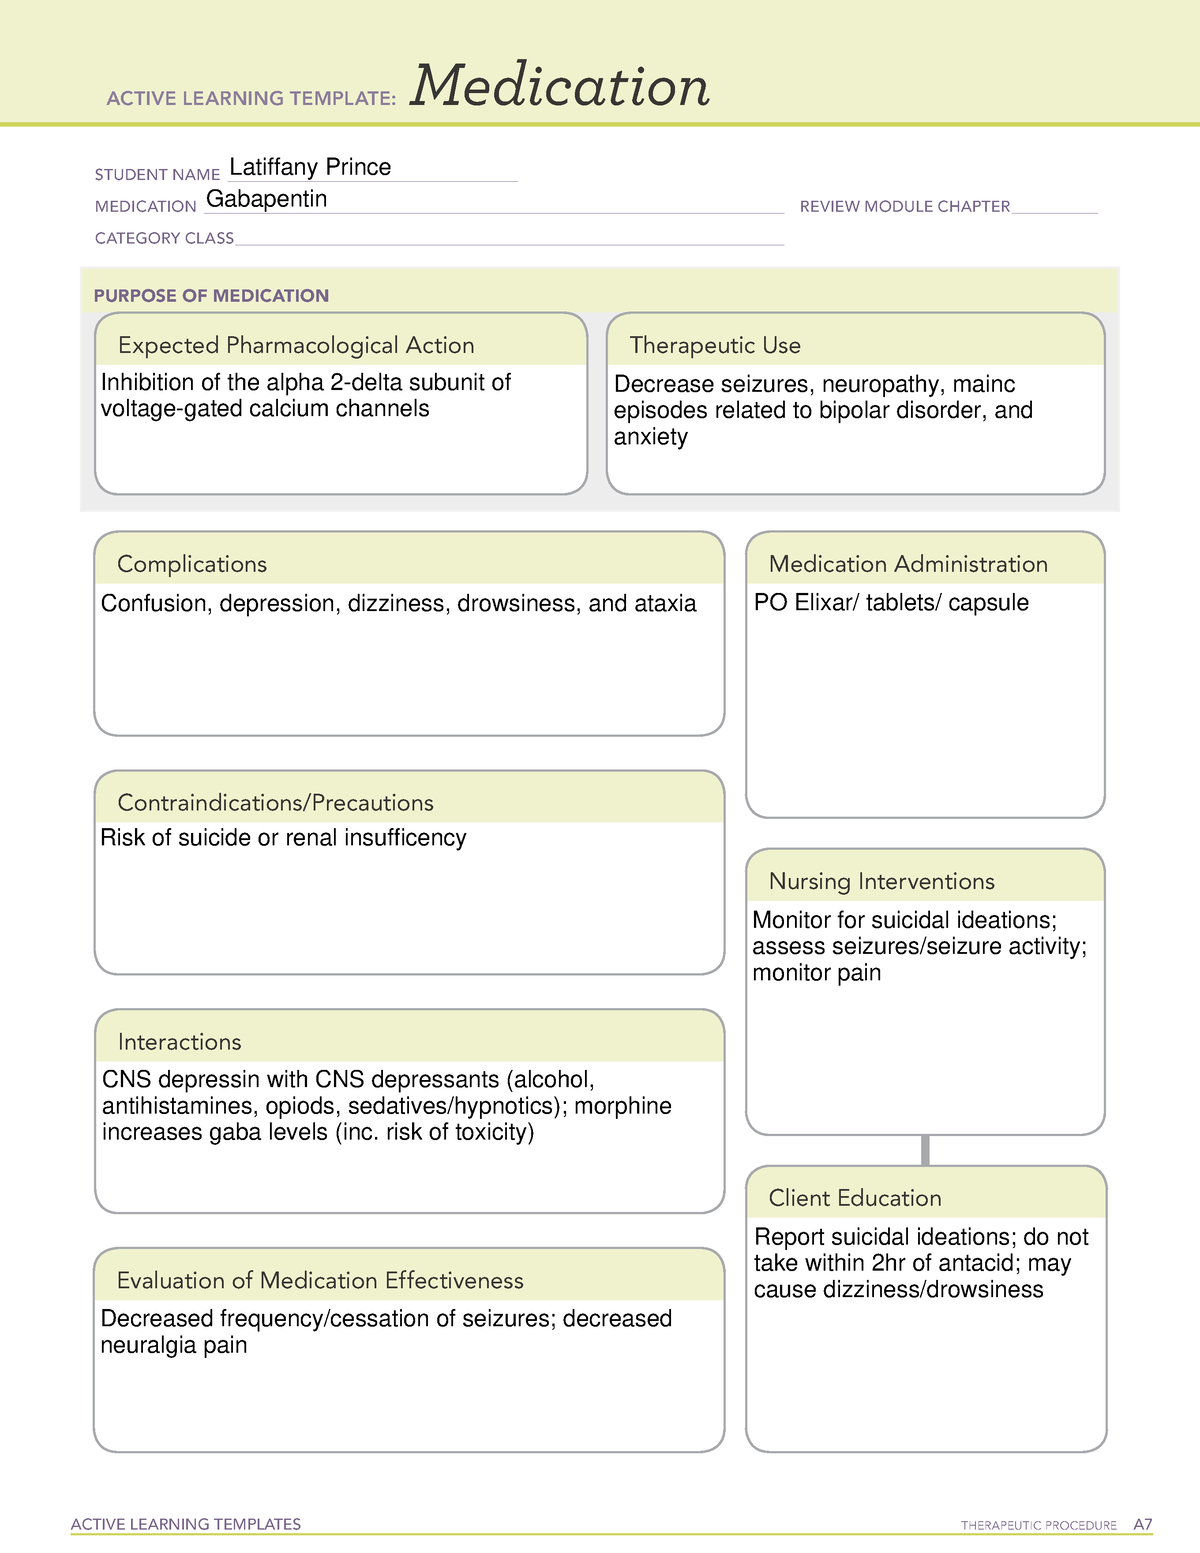 Gabapentin Med Template ACTIVE LEARNING TEMPLATES THERAPEUTIC PROCEDURE A Medication STUDENT